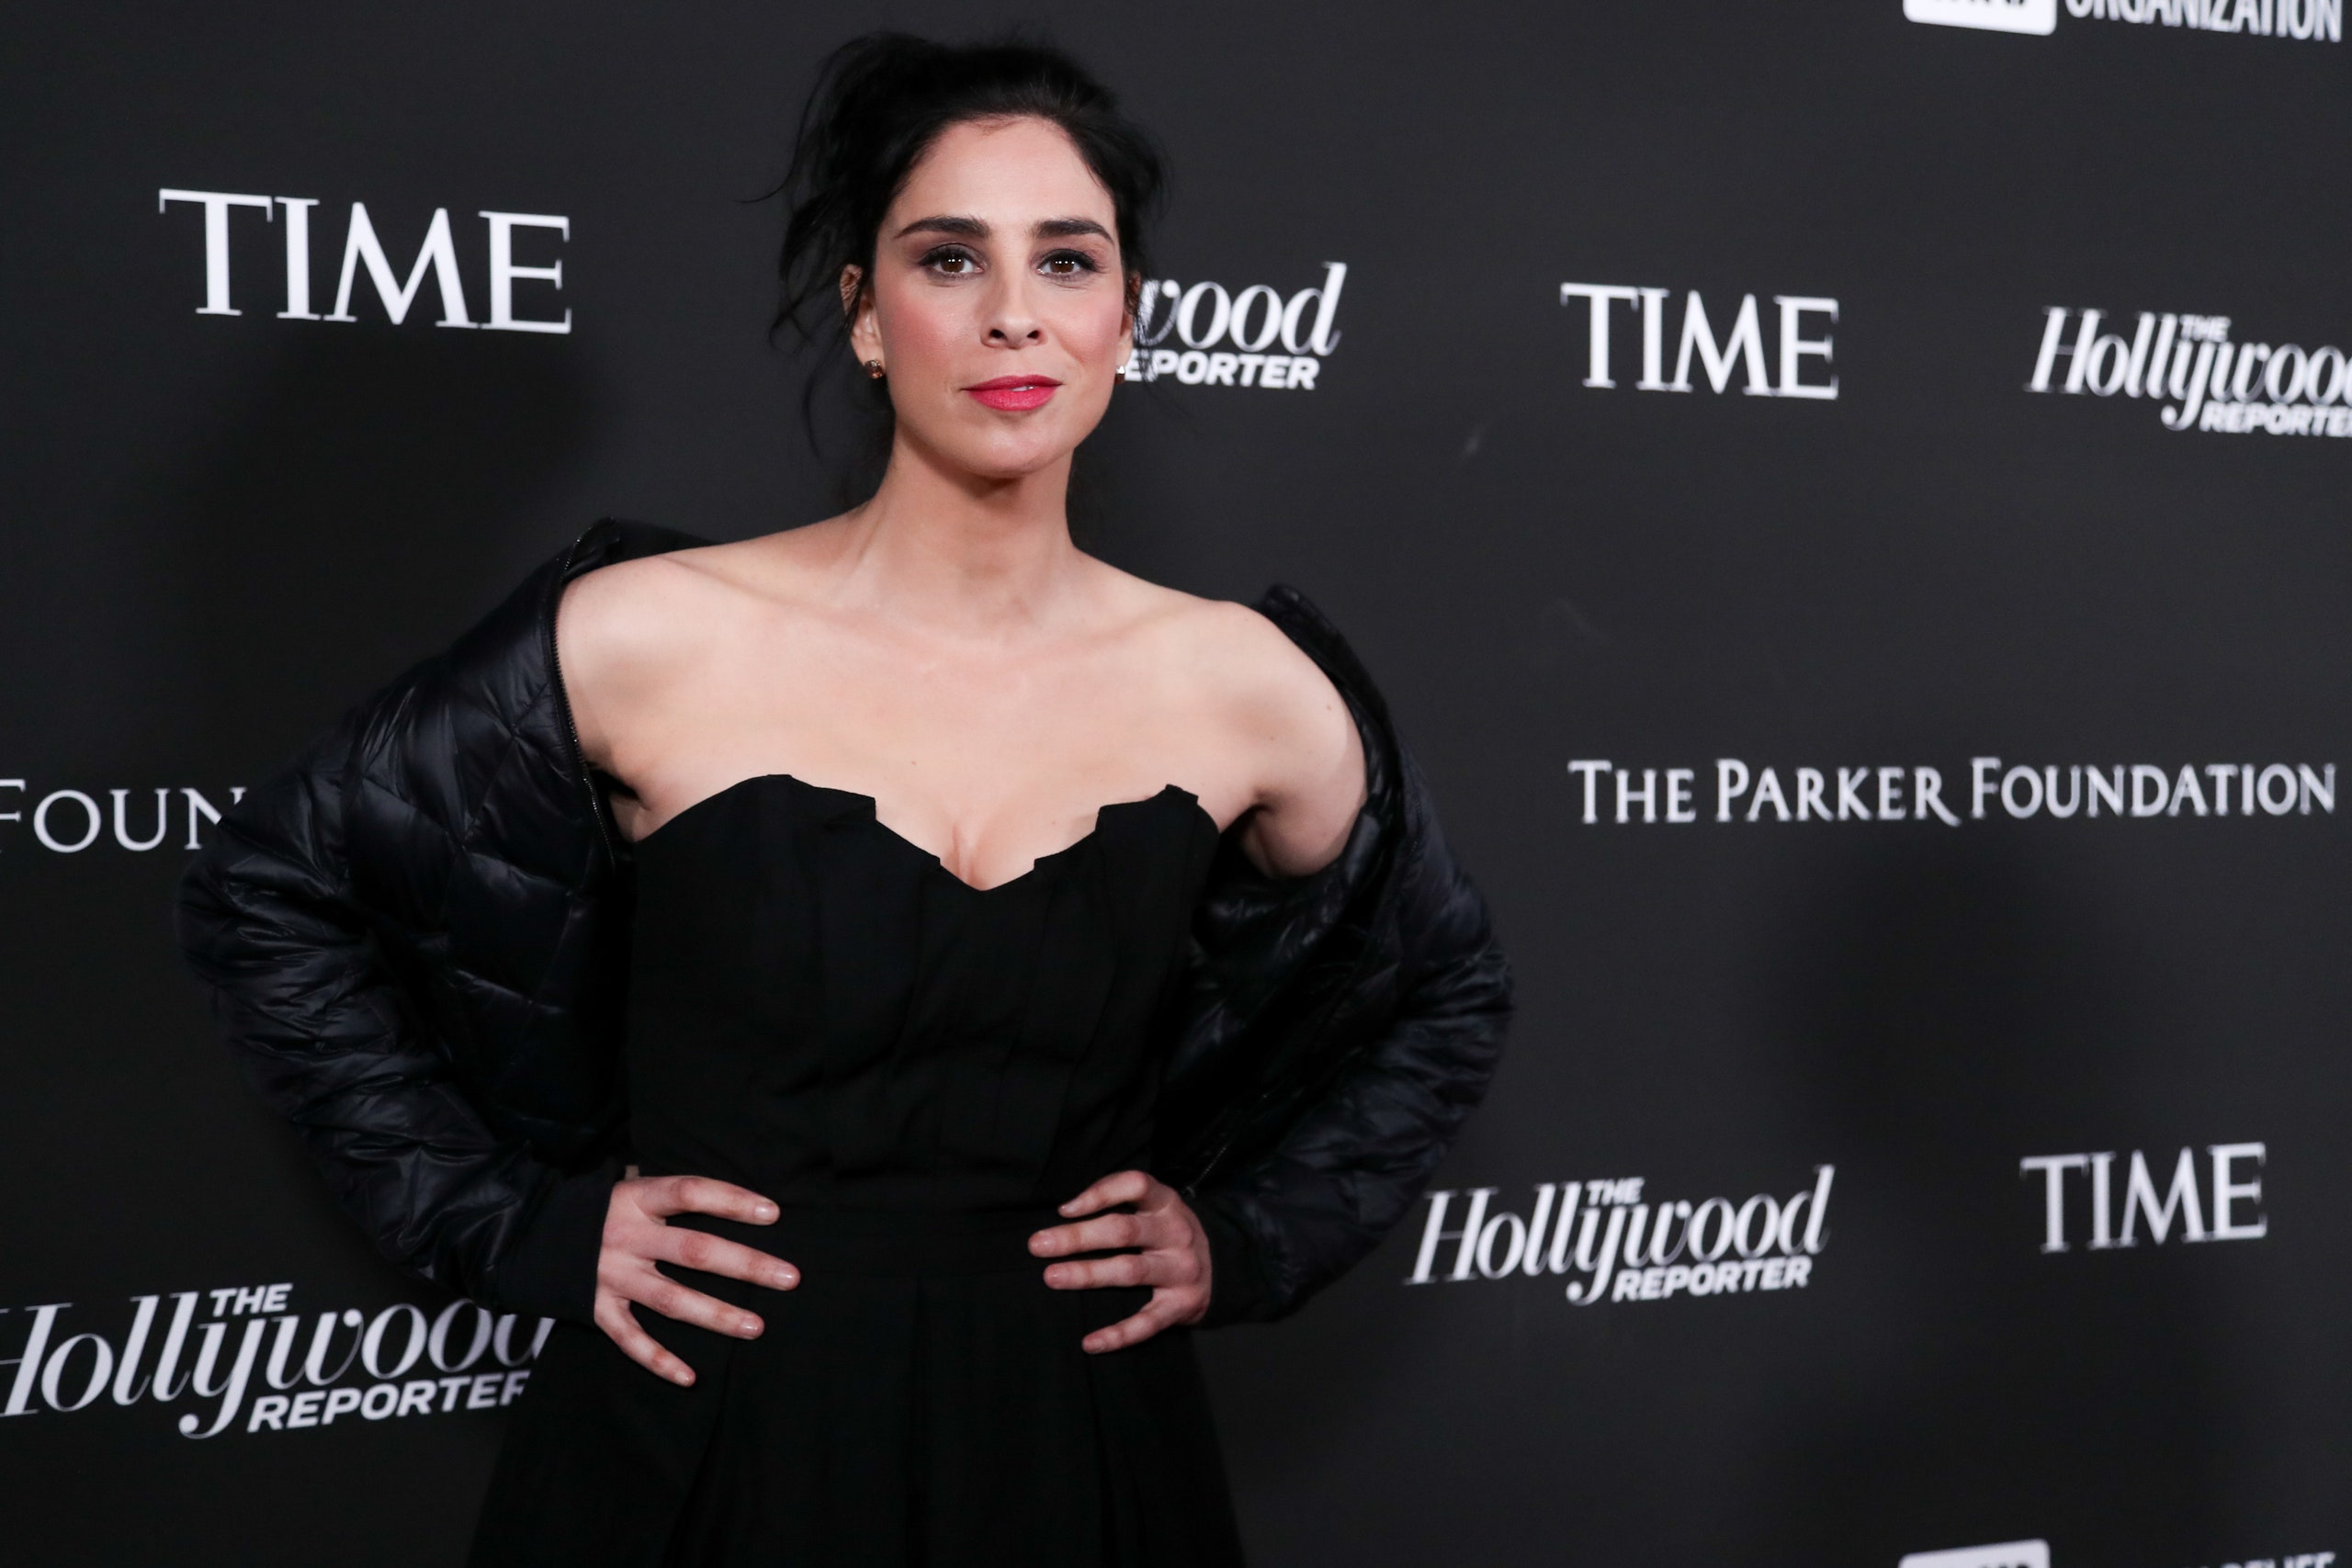 denise furman recommends pictures of sarah silverman pic